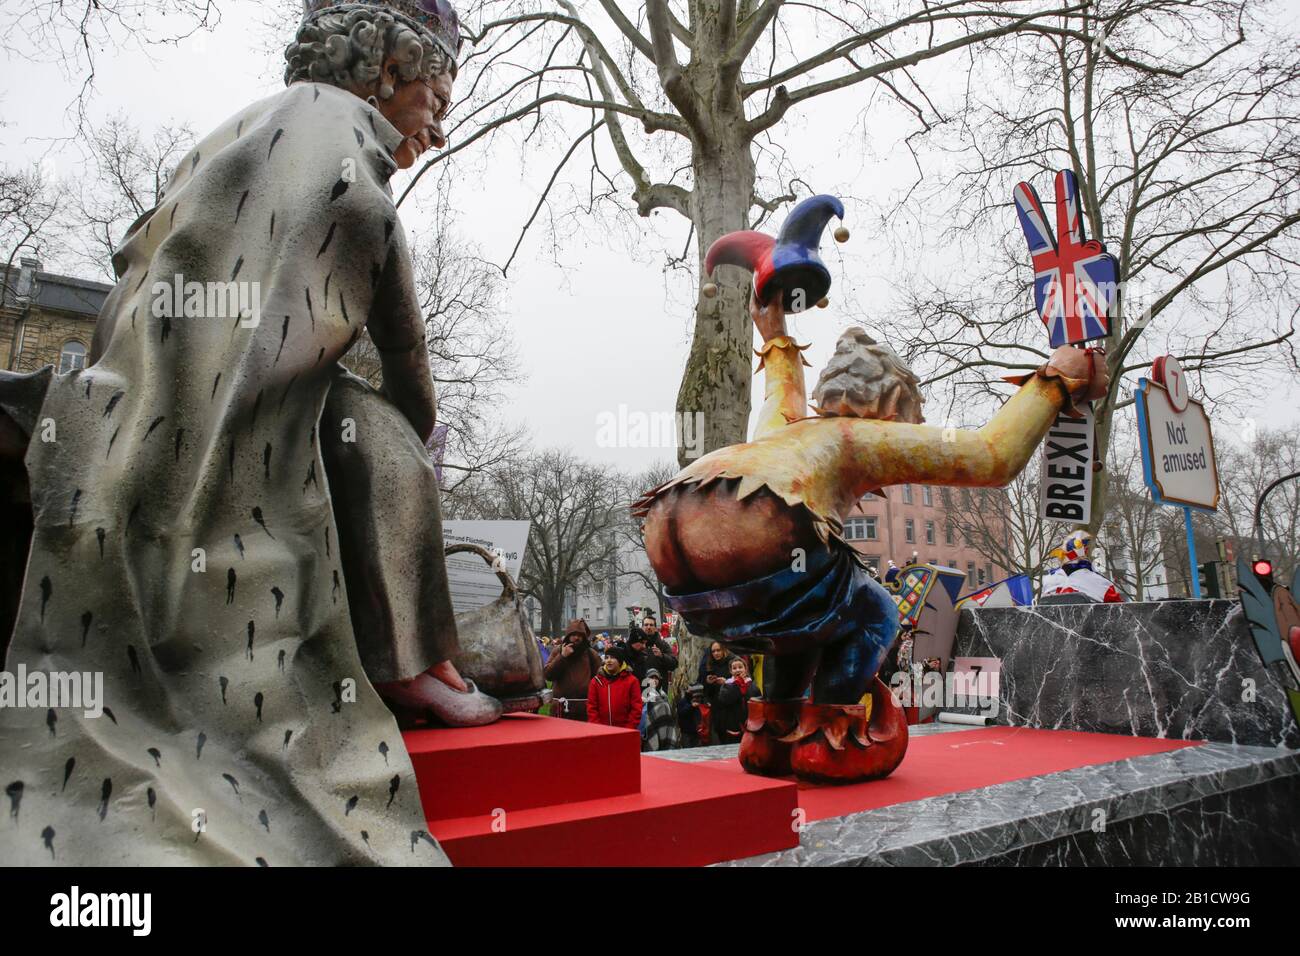 Mainz, Germany. 24th February 2020. British Prime Minister Boris Johnson and Queen Elizabeth II are depicted on a float in the Mainz Rose Monday parade. Boris Johnson is wearing a jester's dress and holds a Brexit sign, while showing his naked bottom to the Queen. Around half a million people lined the streets of Mainz for the traditional Rose Monday Carnival Parade. The 9 km long parade with over 9,000 participants is one of the three large Rose Monday Parades in Germany. Stock Photo